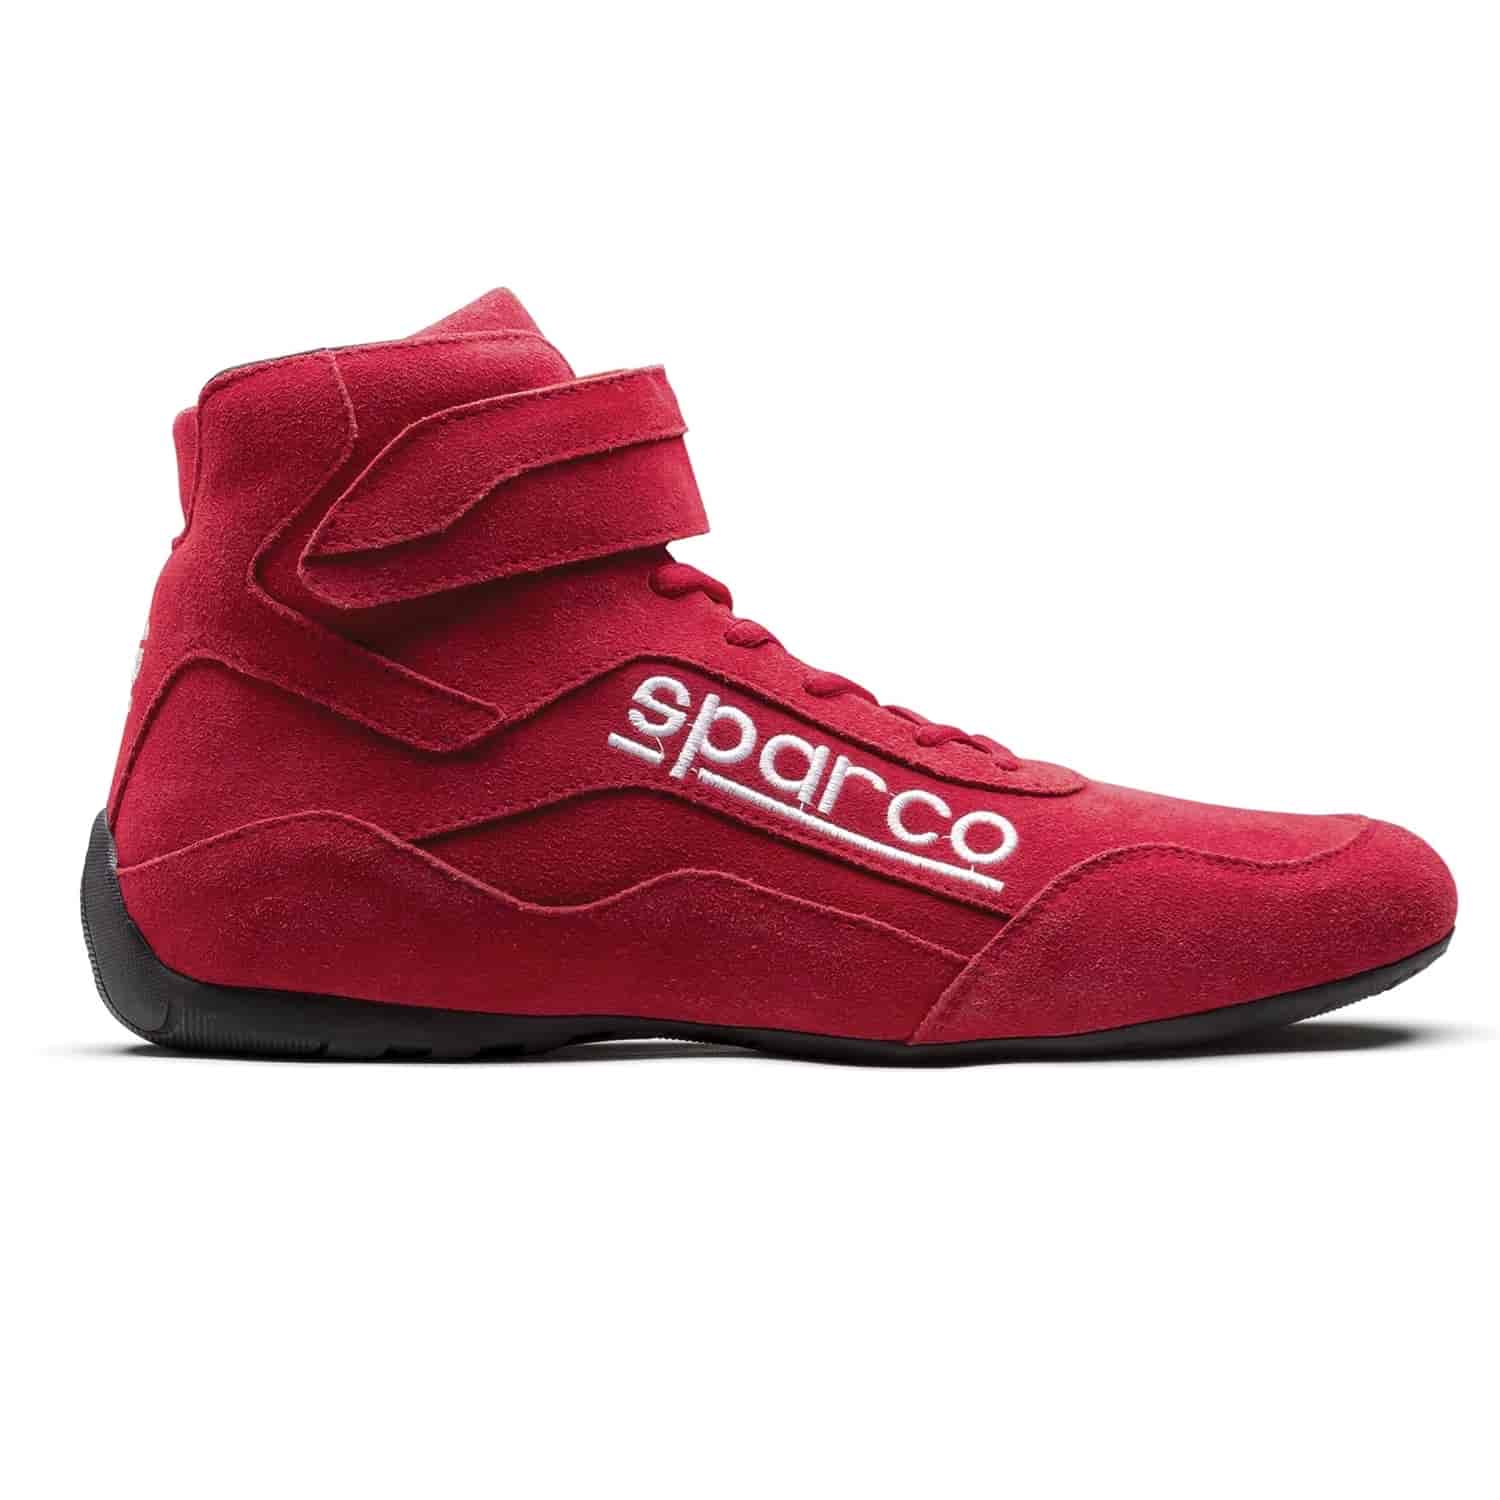 Race 2 Shoe Size 10 - Red